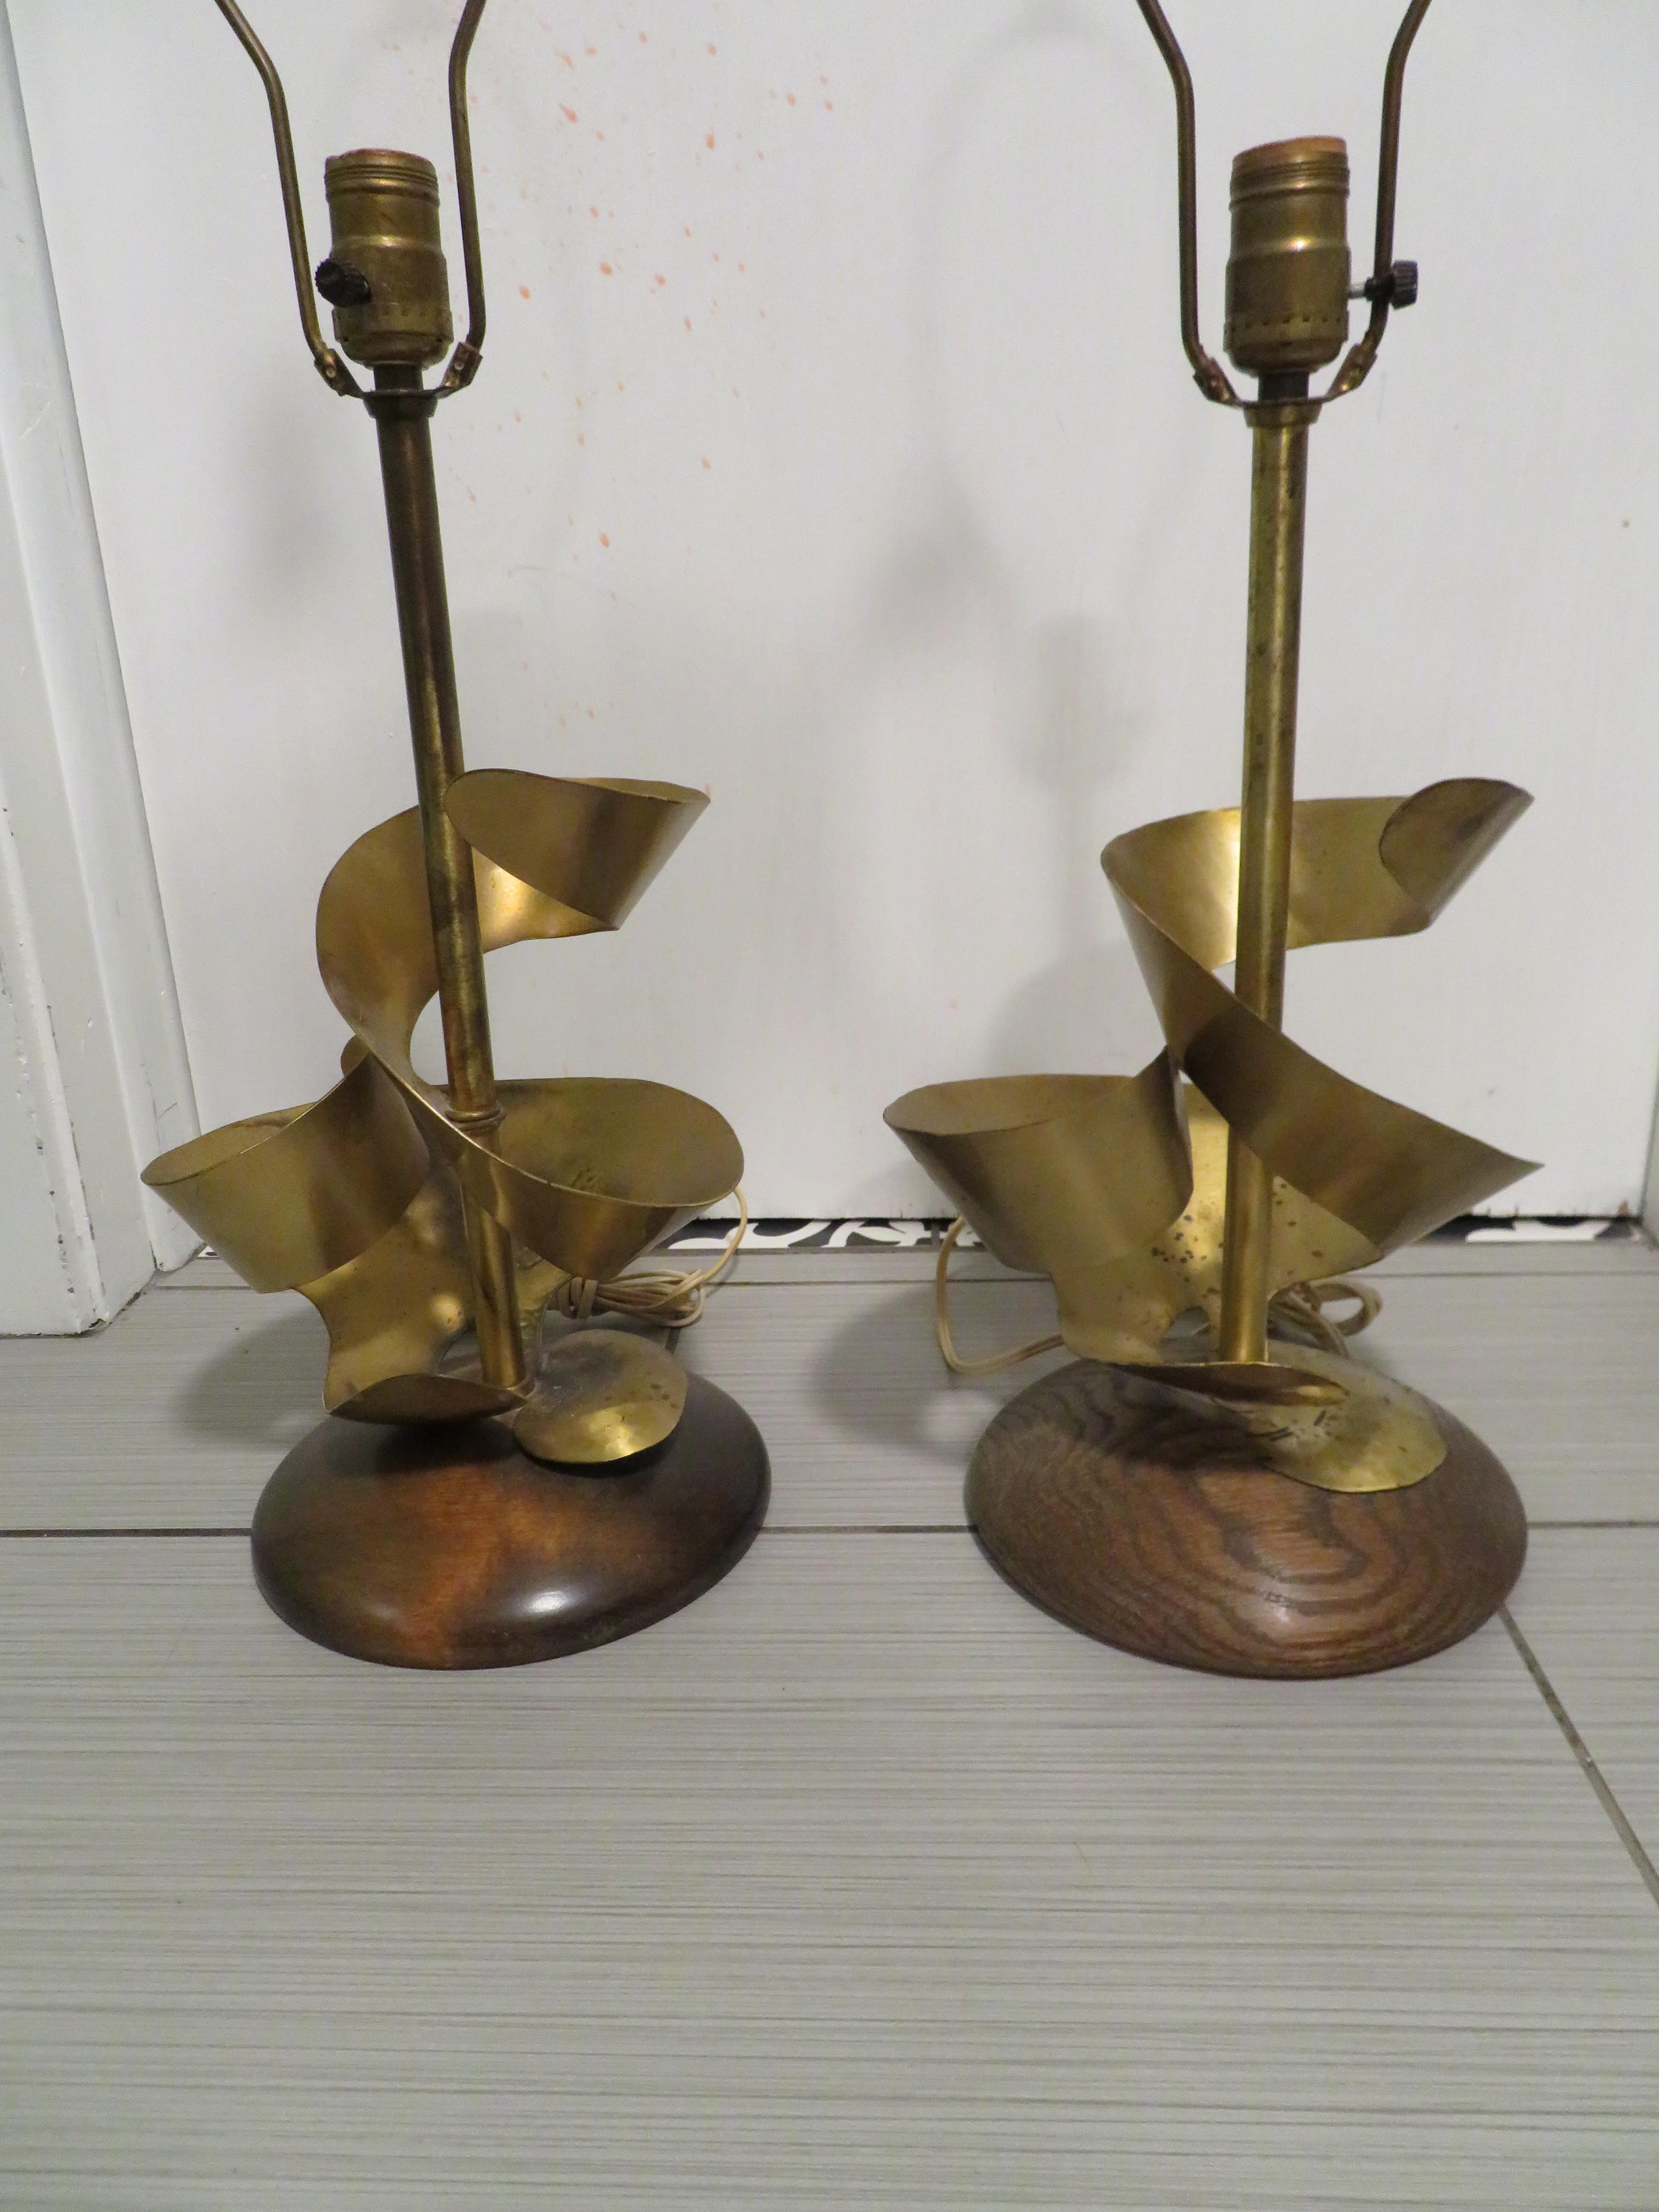 Unusual pair brass abstract Heifetz lamps, circa 1950s. We are just in love with all the wonderful lamps designed by Yasha Heifetz and this pair is very special and rare. They measure 30